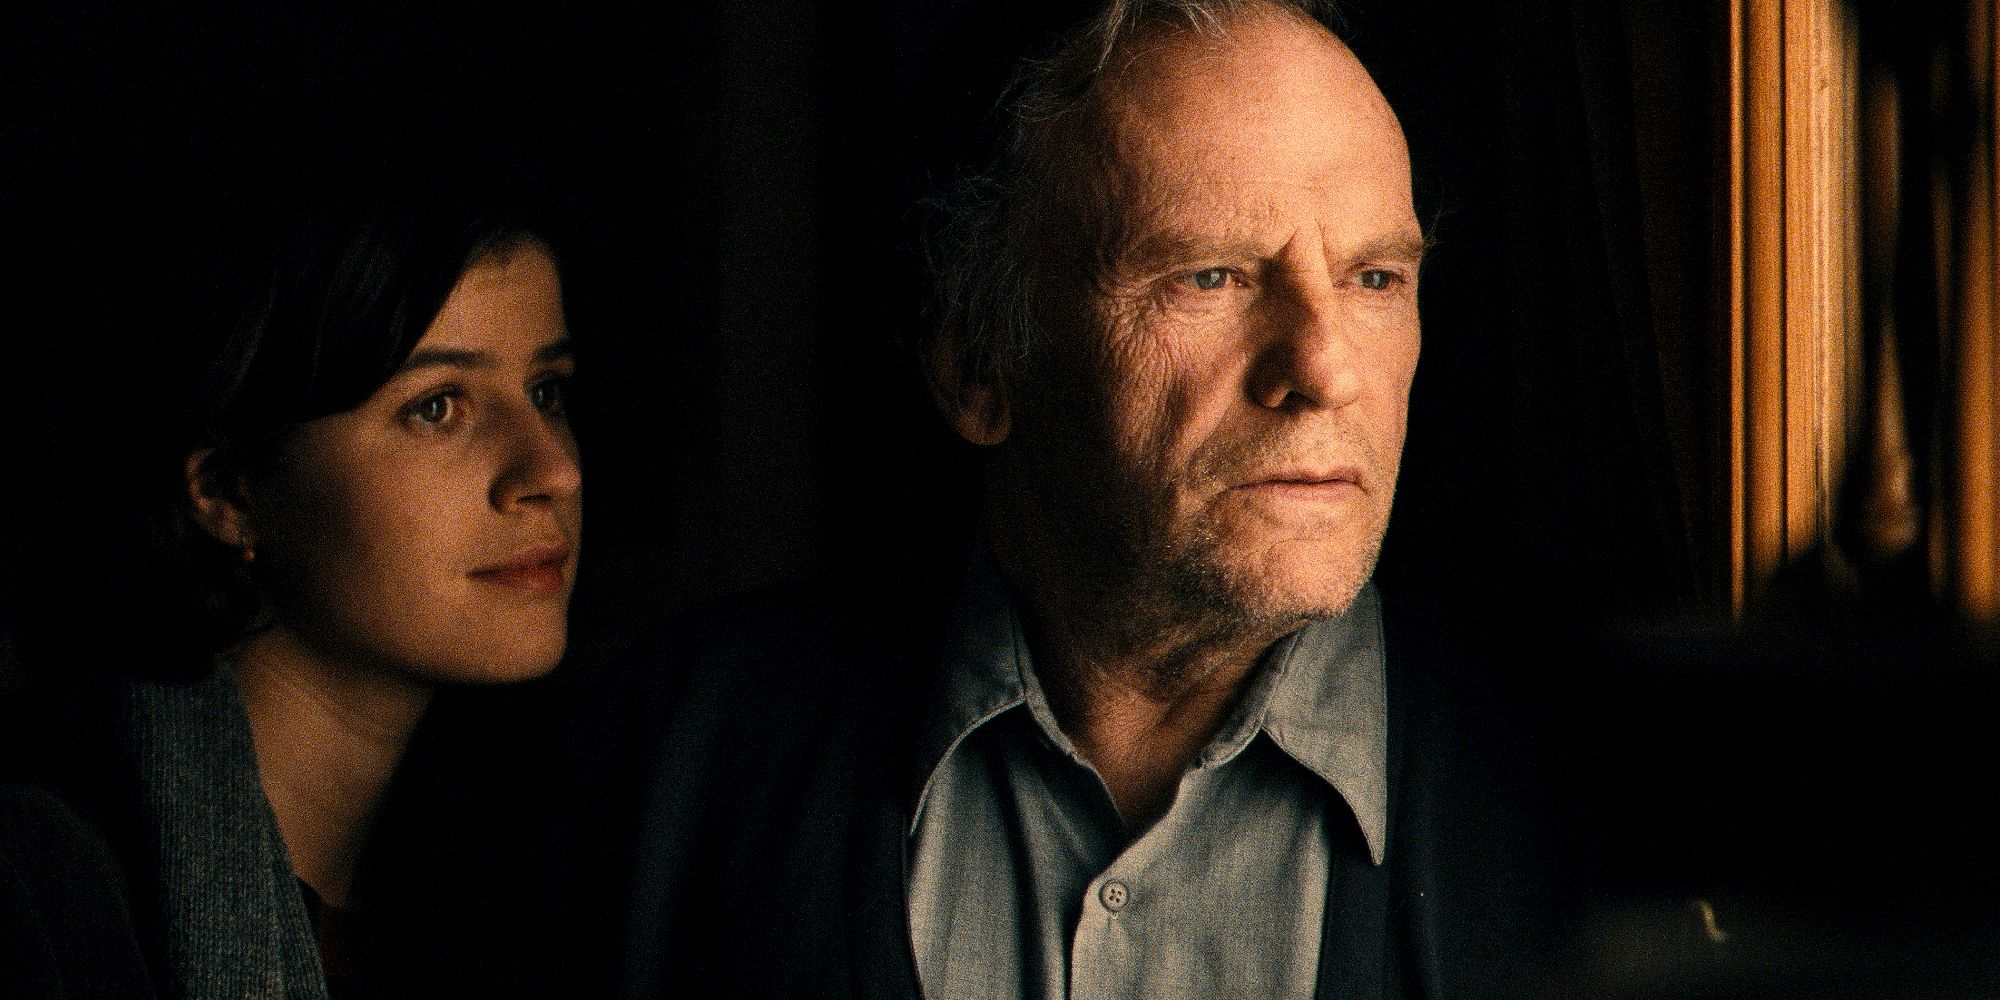 Irène Jacob and Jean-Louis Trintignant in Three Colors Red looking out of the window.